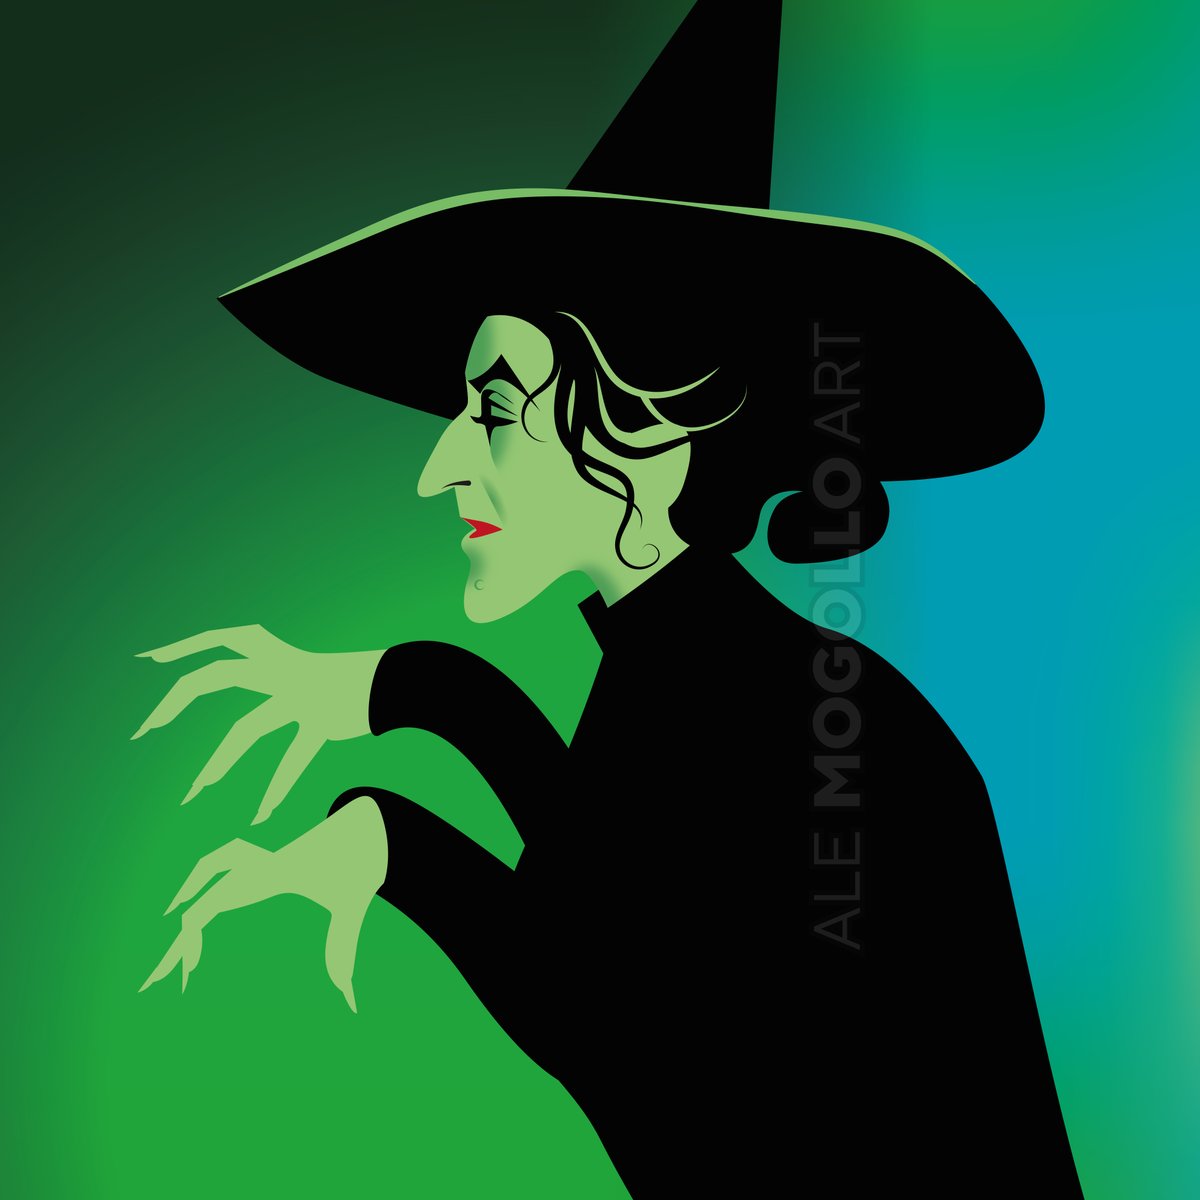 Remembering the Wicked Witch of the West herself, the great Margaret Hamilton on her birthday.
#margarethamilton #wickedwitchofthewest #Witches #thewizardofoz #dorothy #judygarland #oldhollywood #fanart #alejandromogolloart